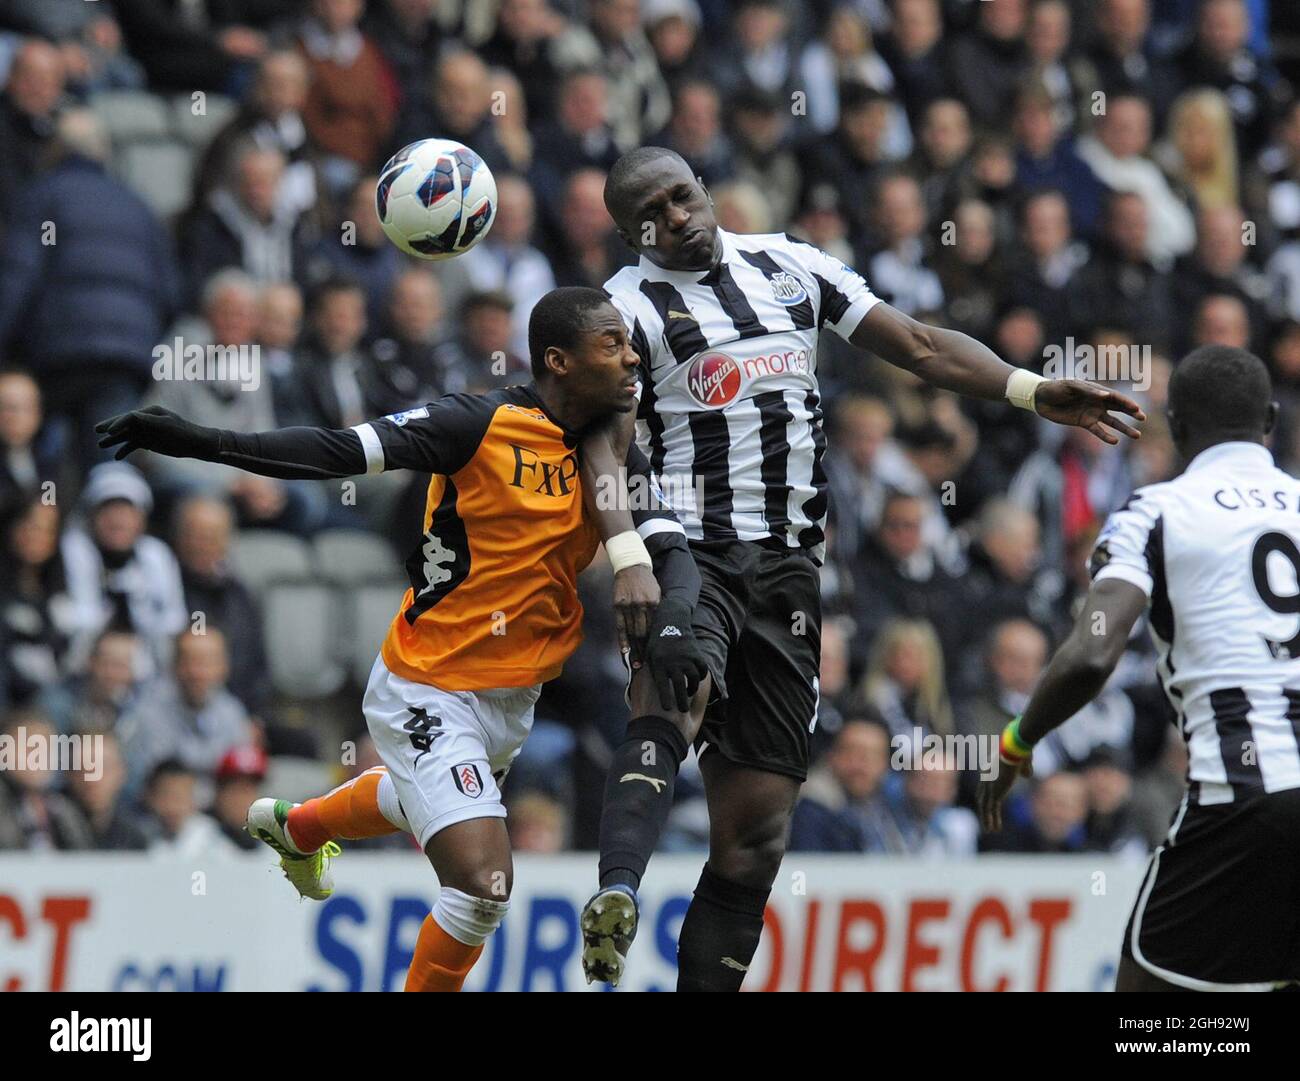 Eyong Enoh of Fulham and Moussa Sissoko of Newcastle United during the Barclays Premier League match between Newcastle Utd and Fulham at St. James' Park in Newcastle on April 7th, 2013. Stock Photo